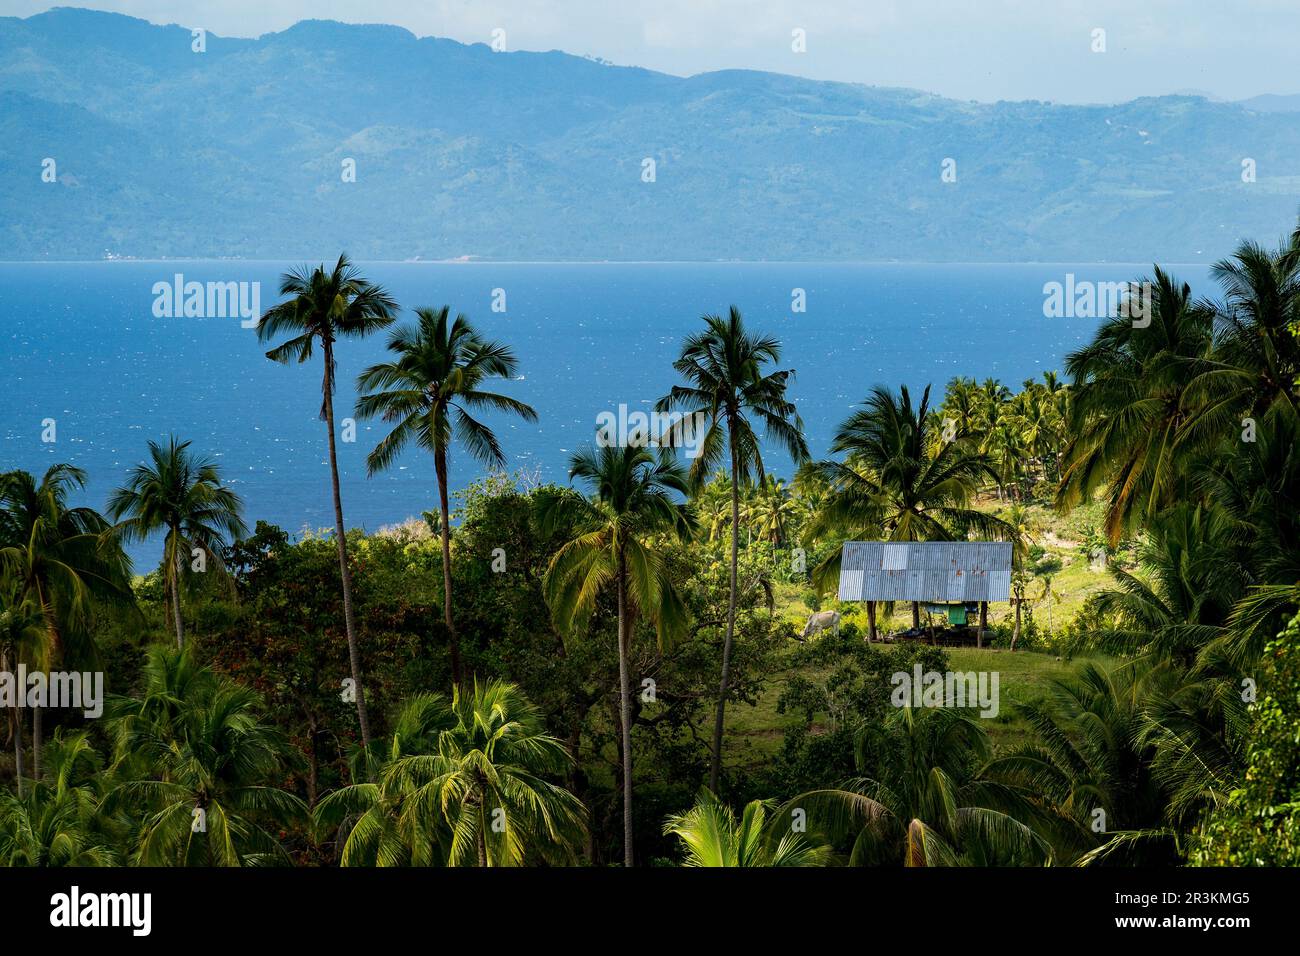 Palm trees and small hut on the island cebu in the philippines Stock Photo